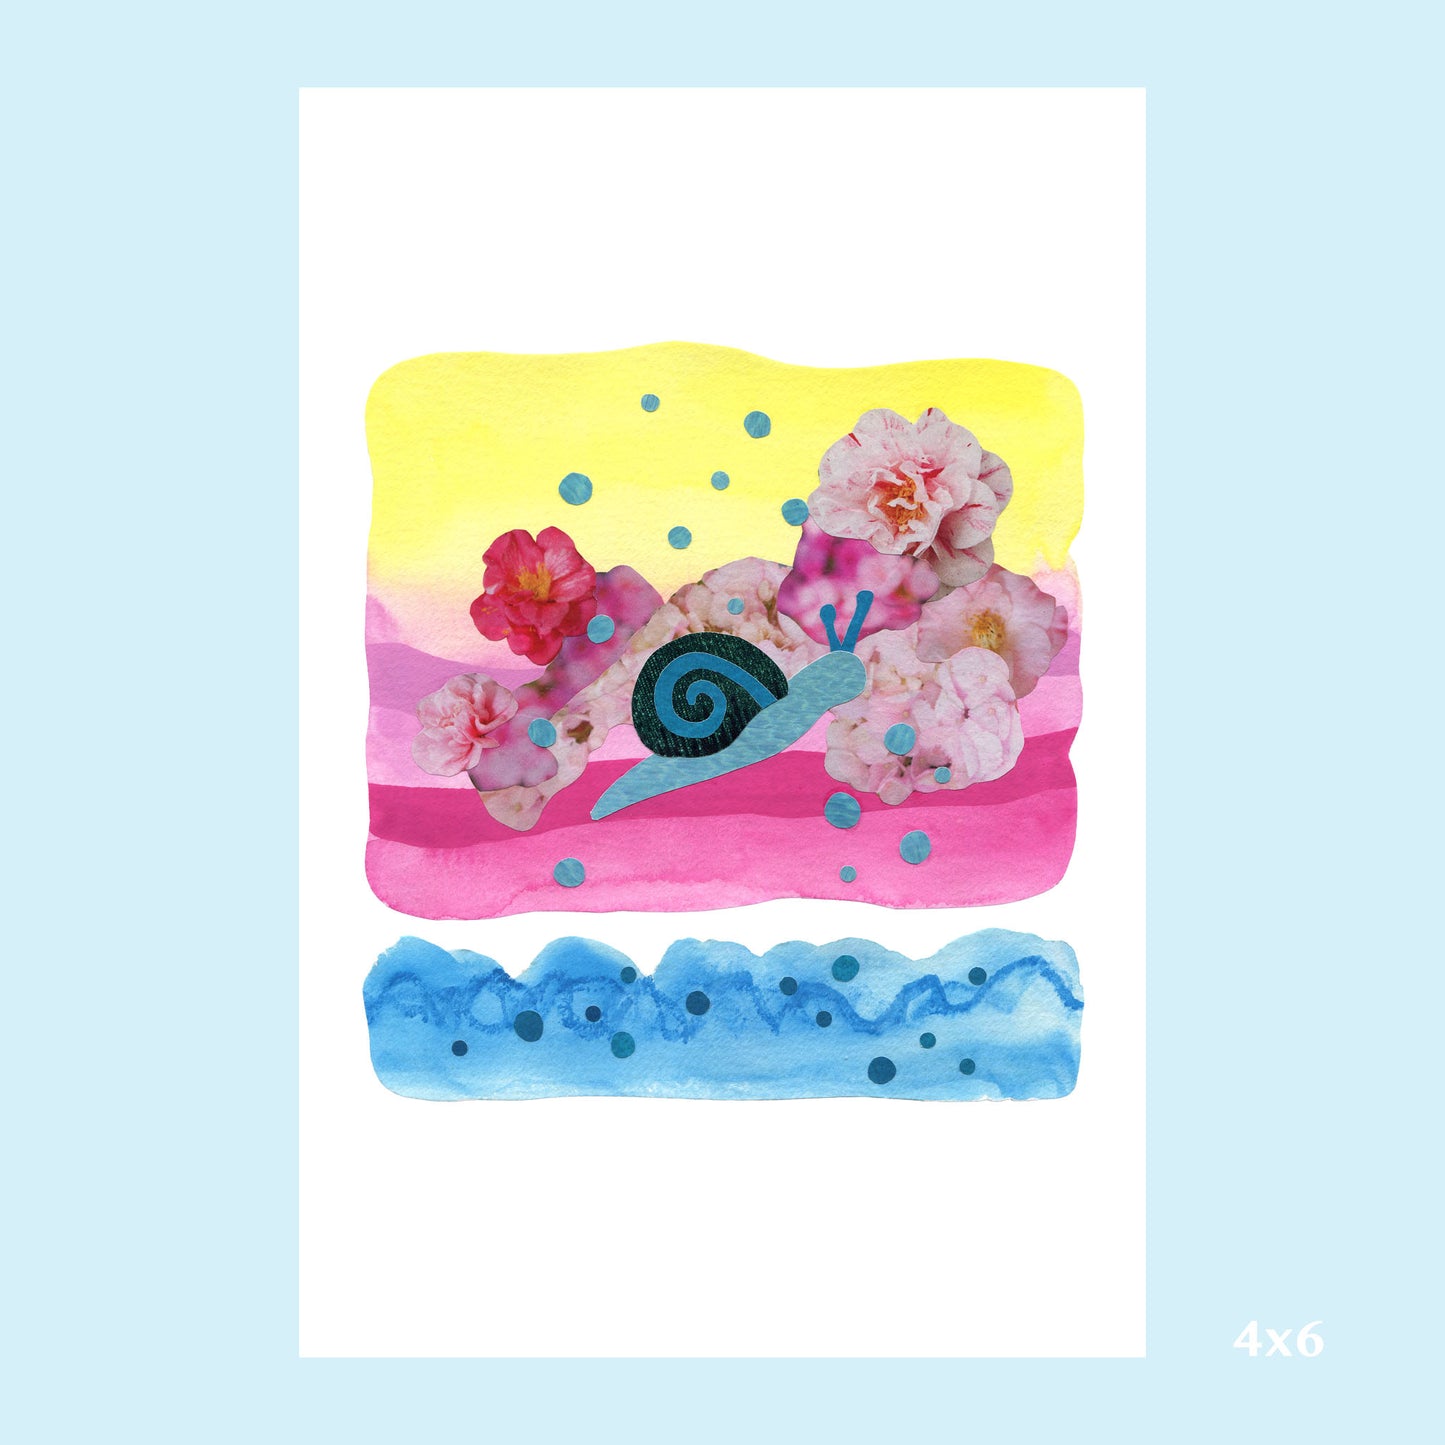 Swimming in Flowers - Collage Art Print